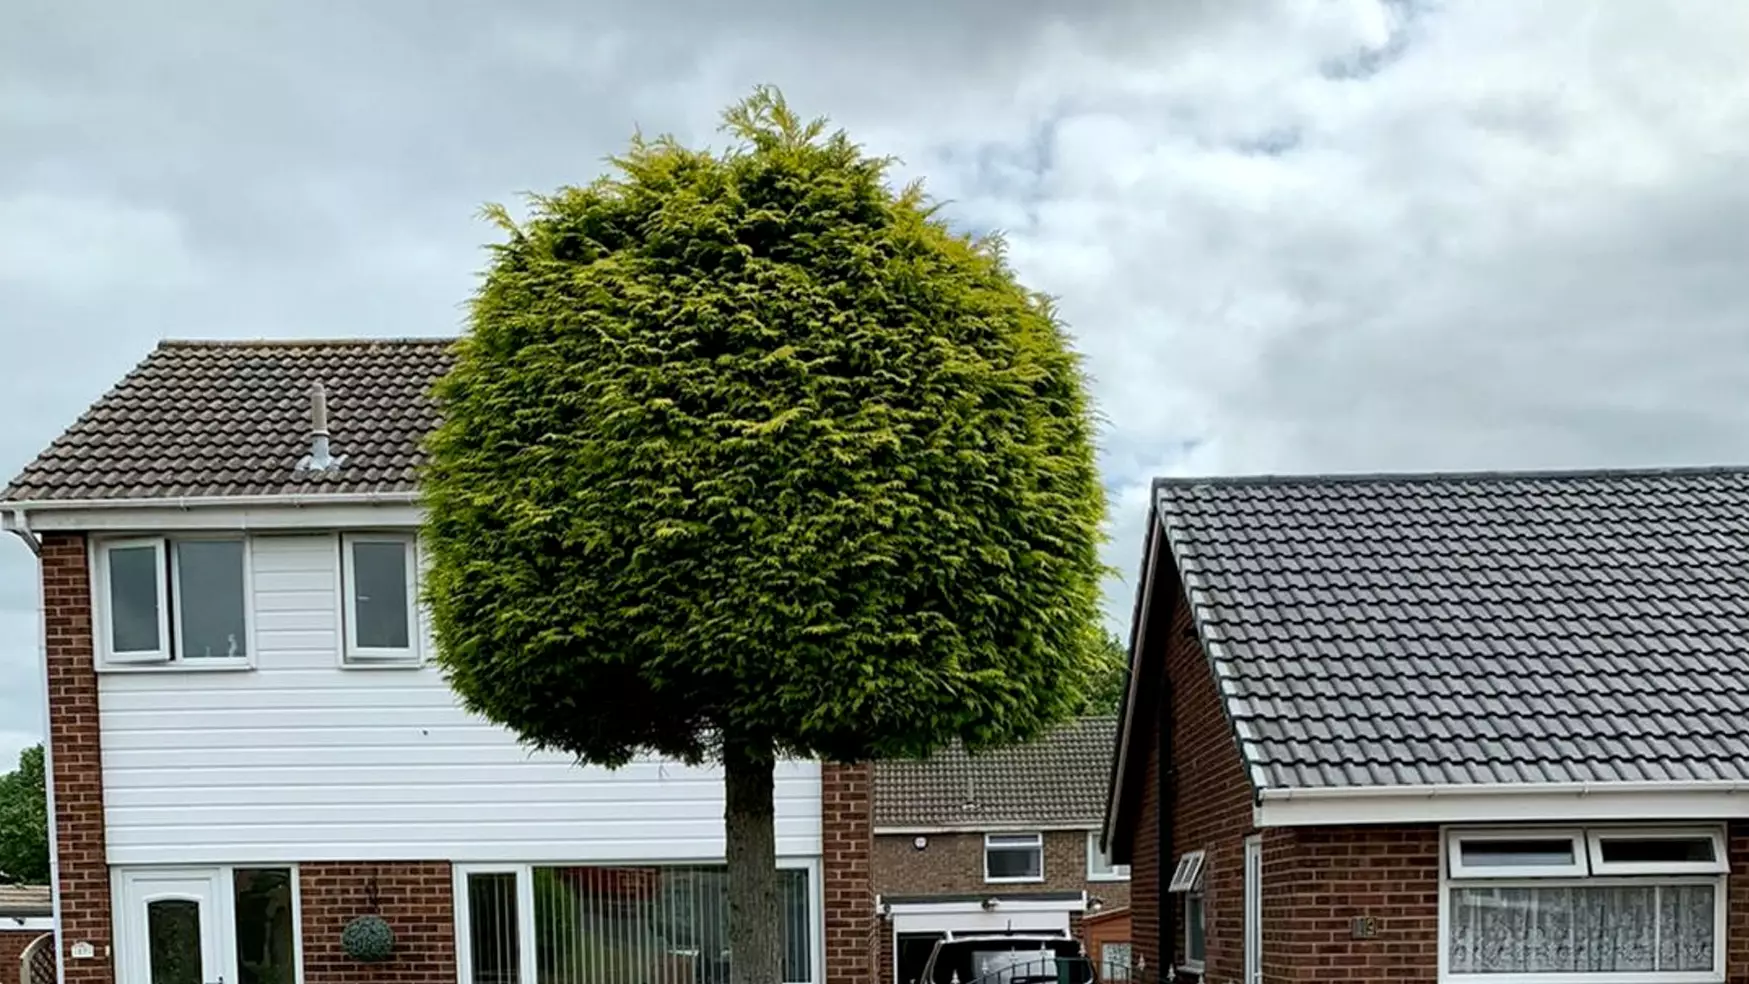 'Petty' Neighbour Chops Down Exactly Half Of Tree After Argument